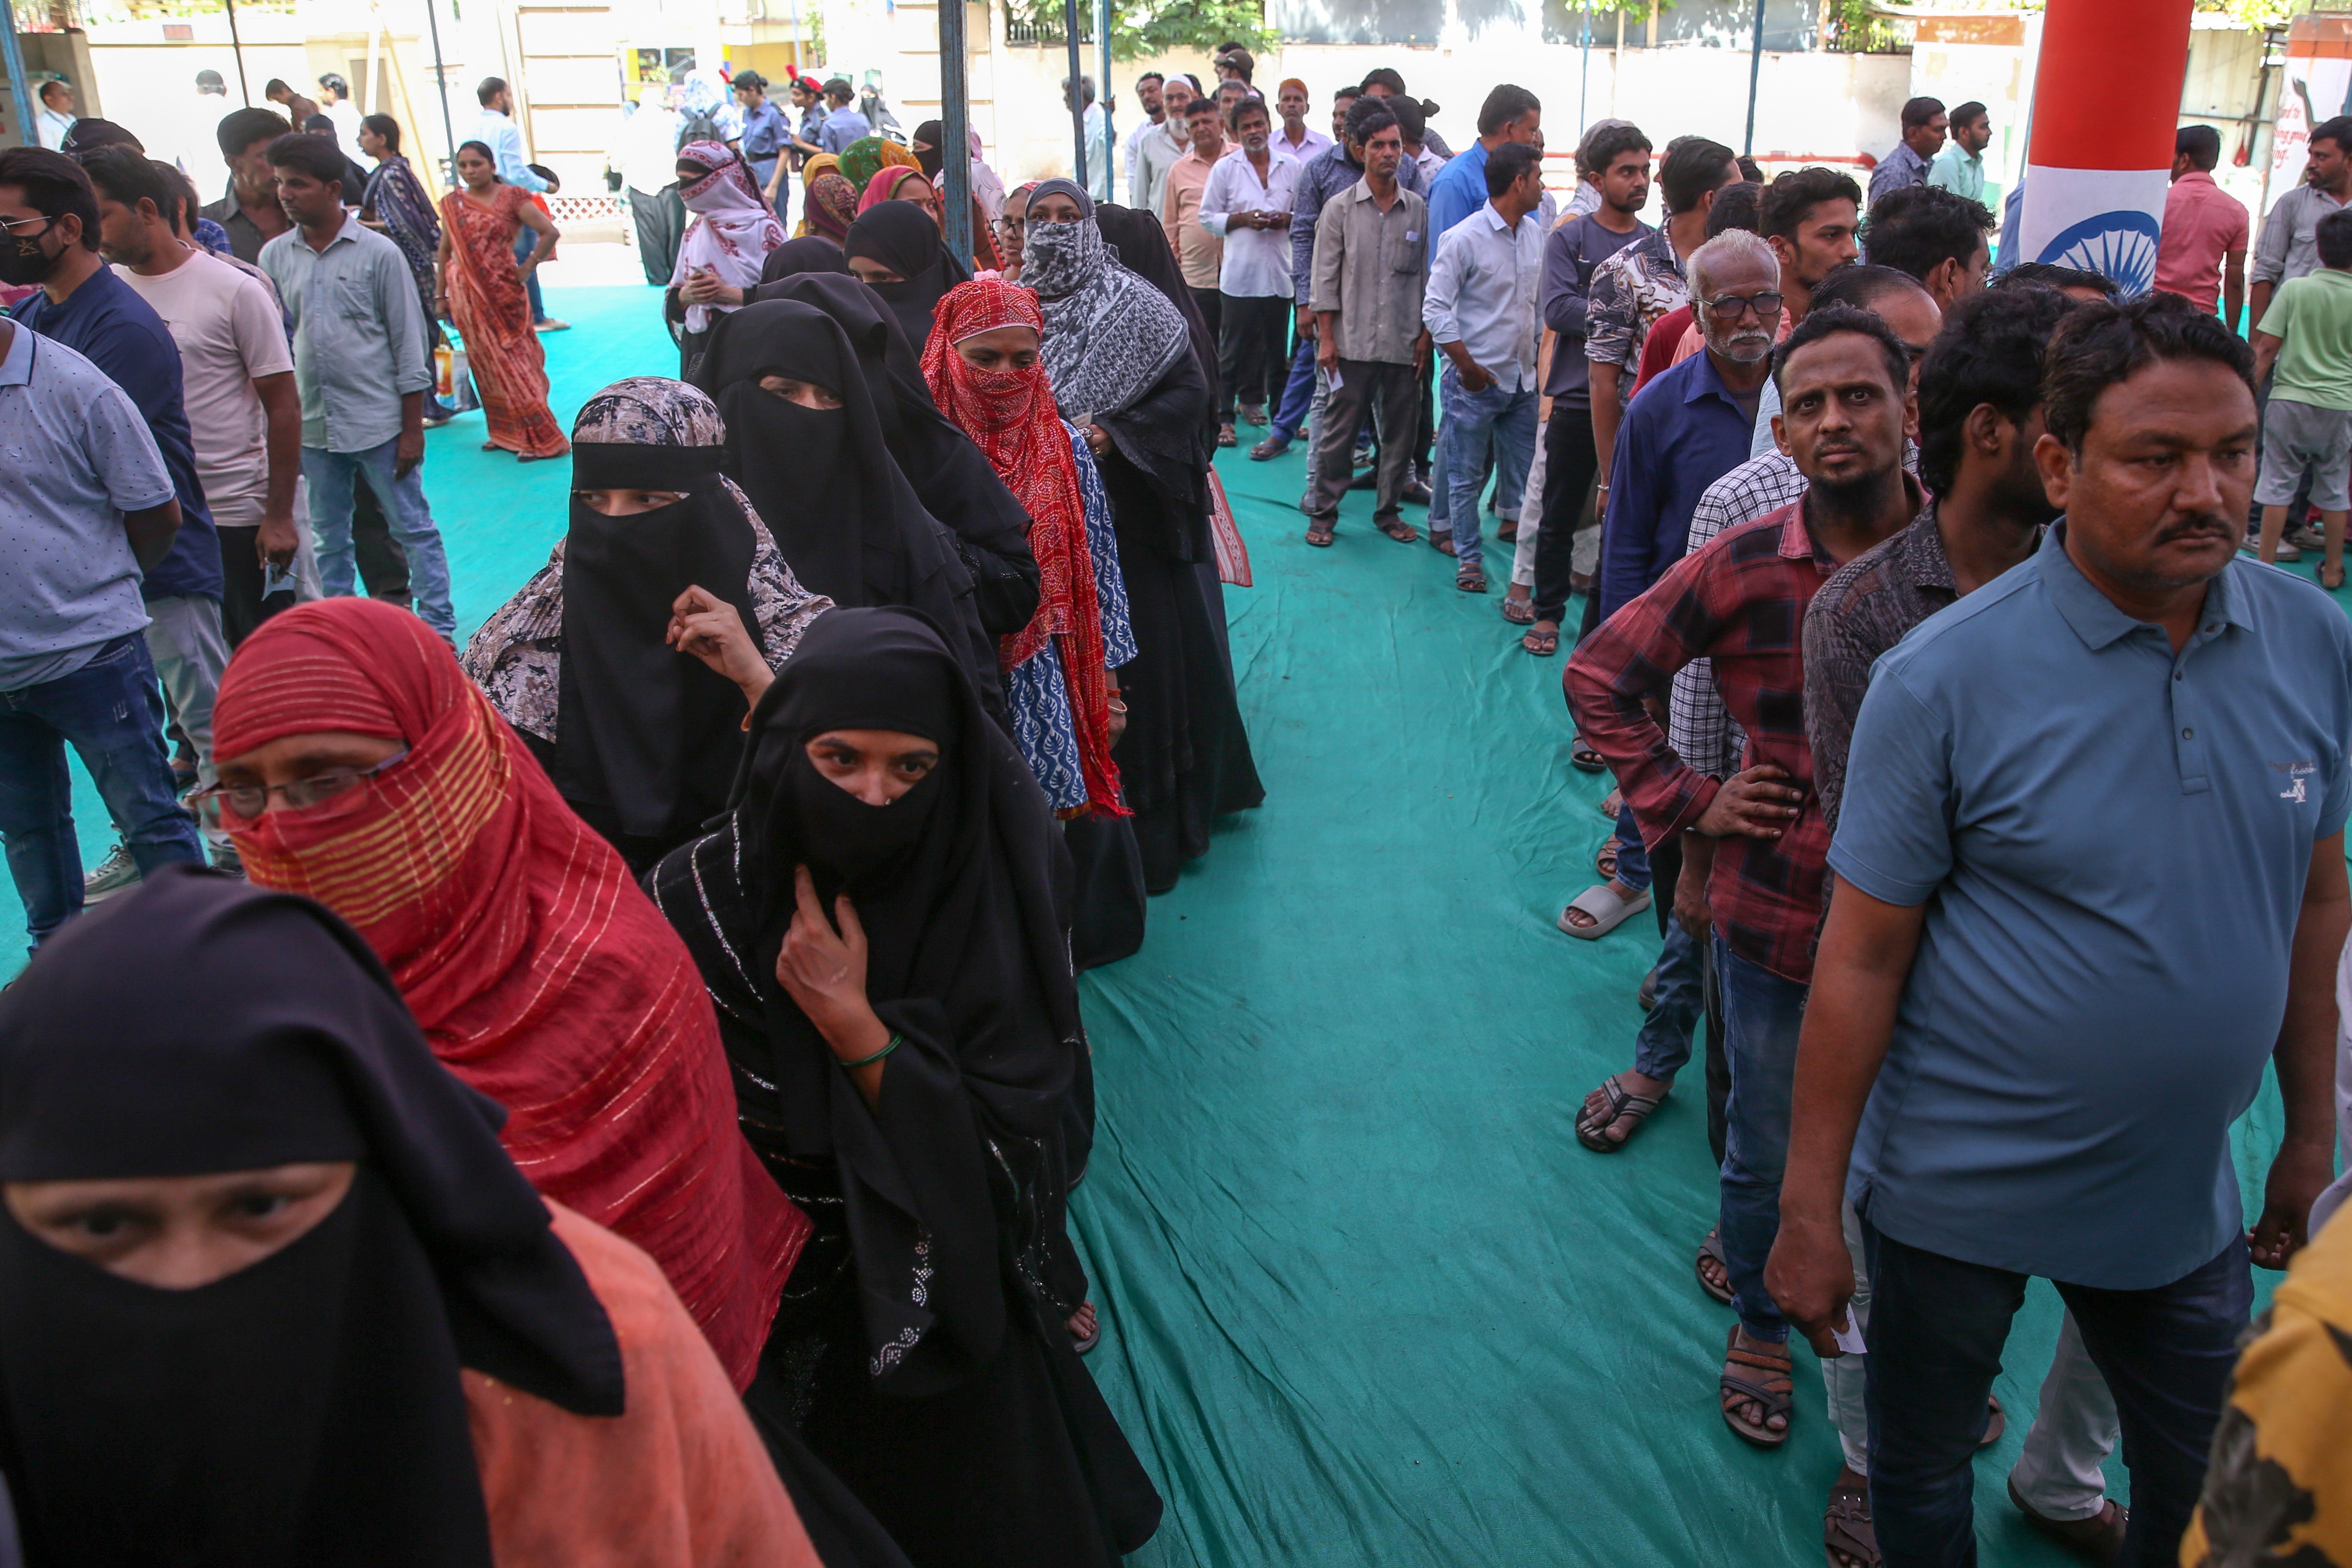 Indian voters wait outside a polling station during the third phase of the election in Ahmedabad, Gujarat